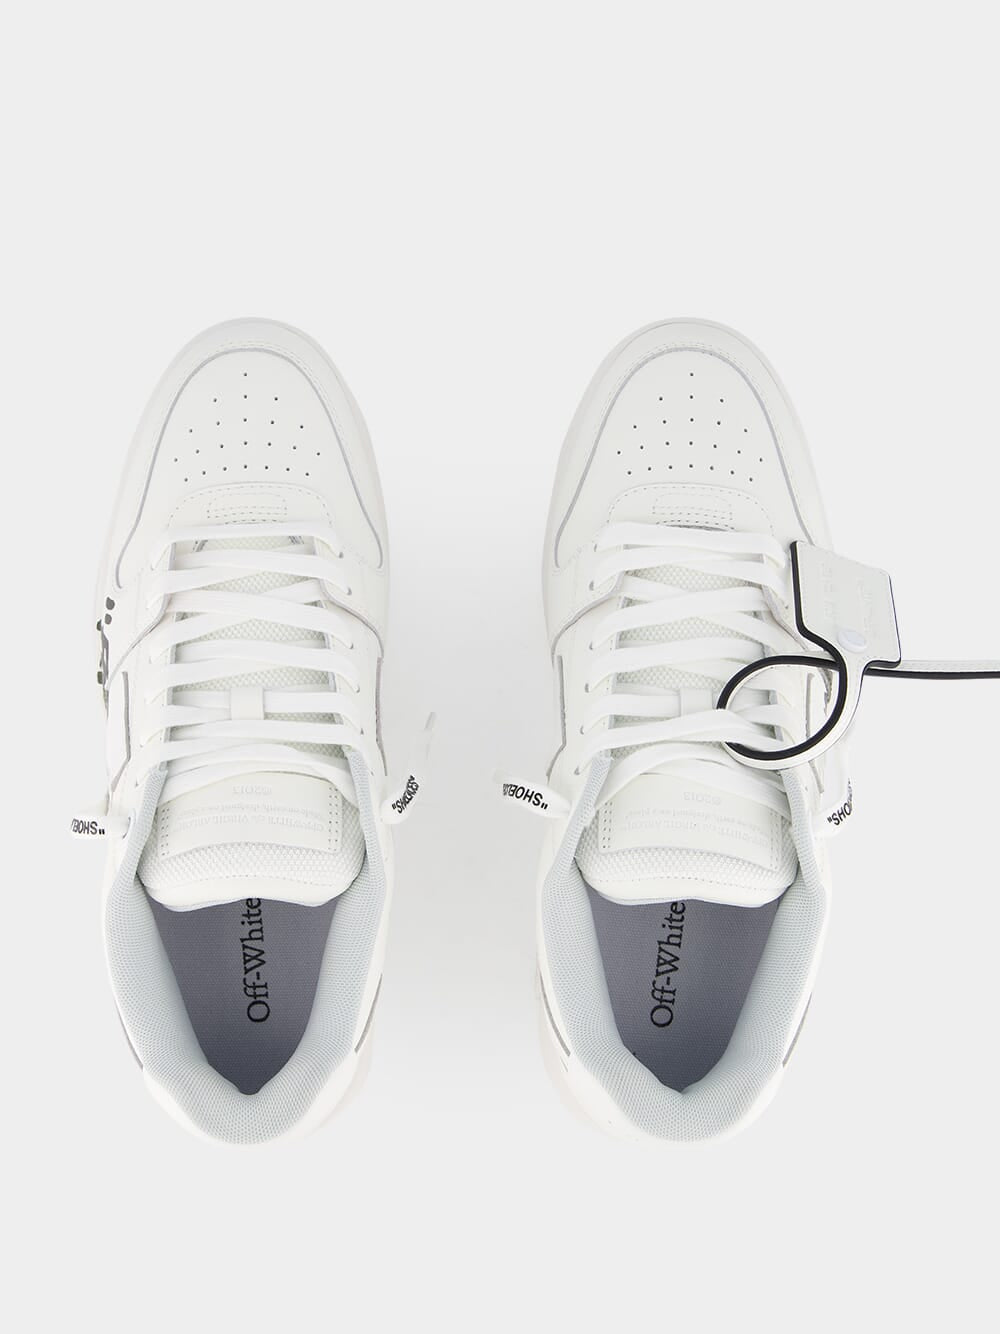 Out of Office "For Walking" Sneakers